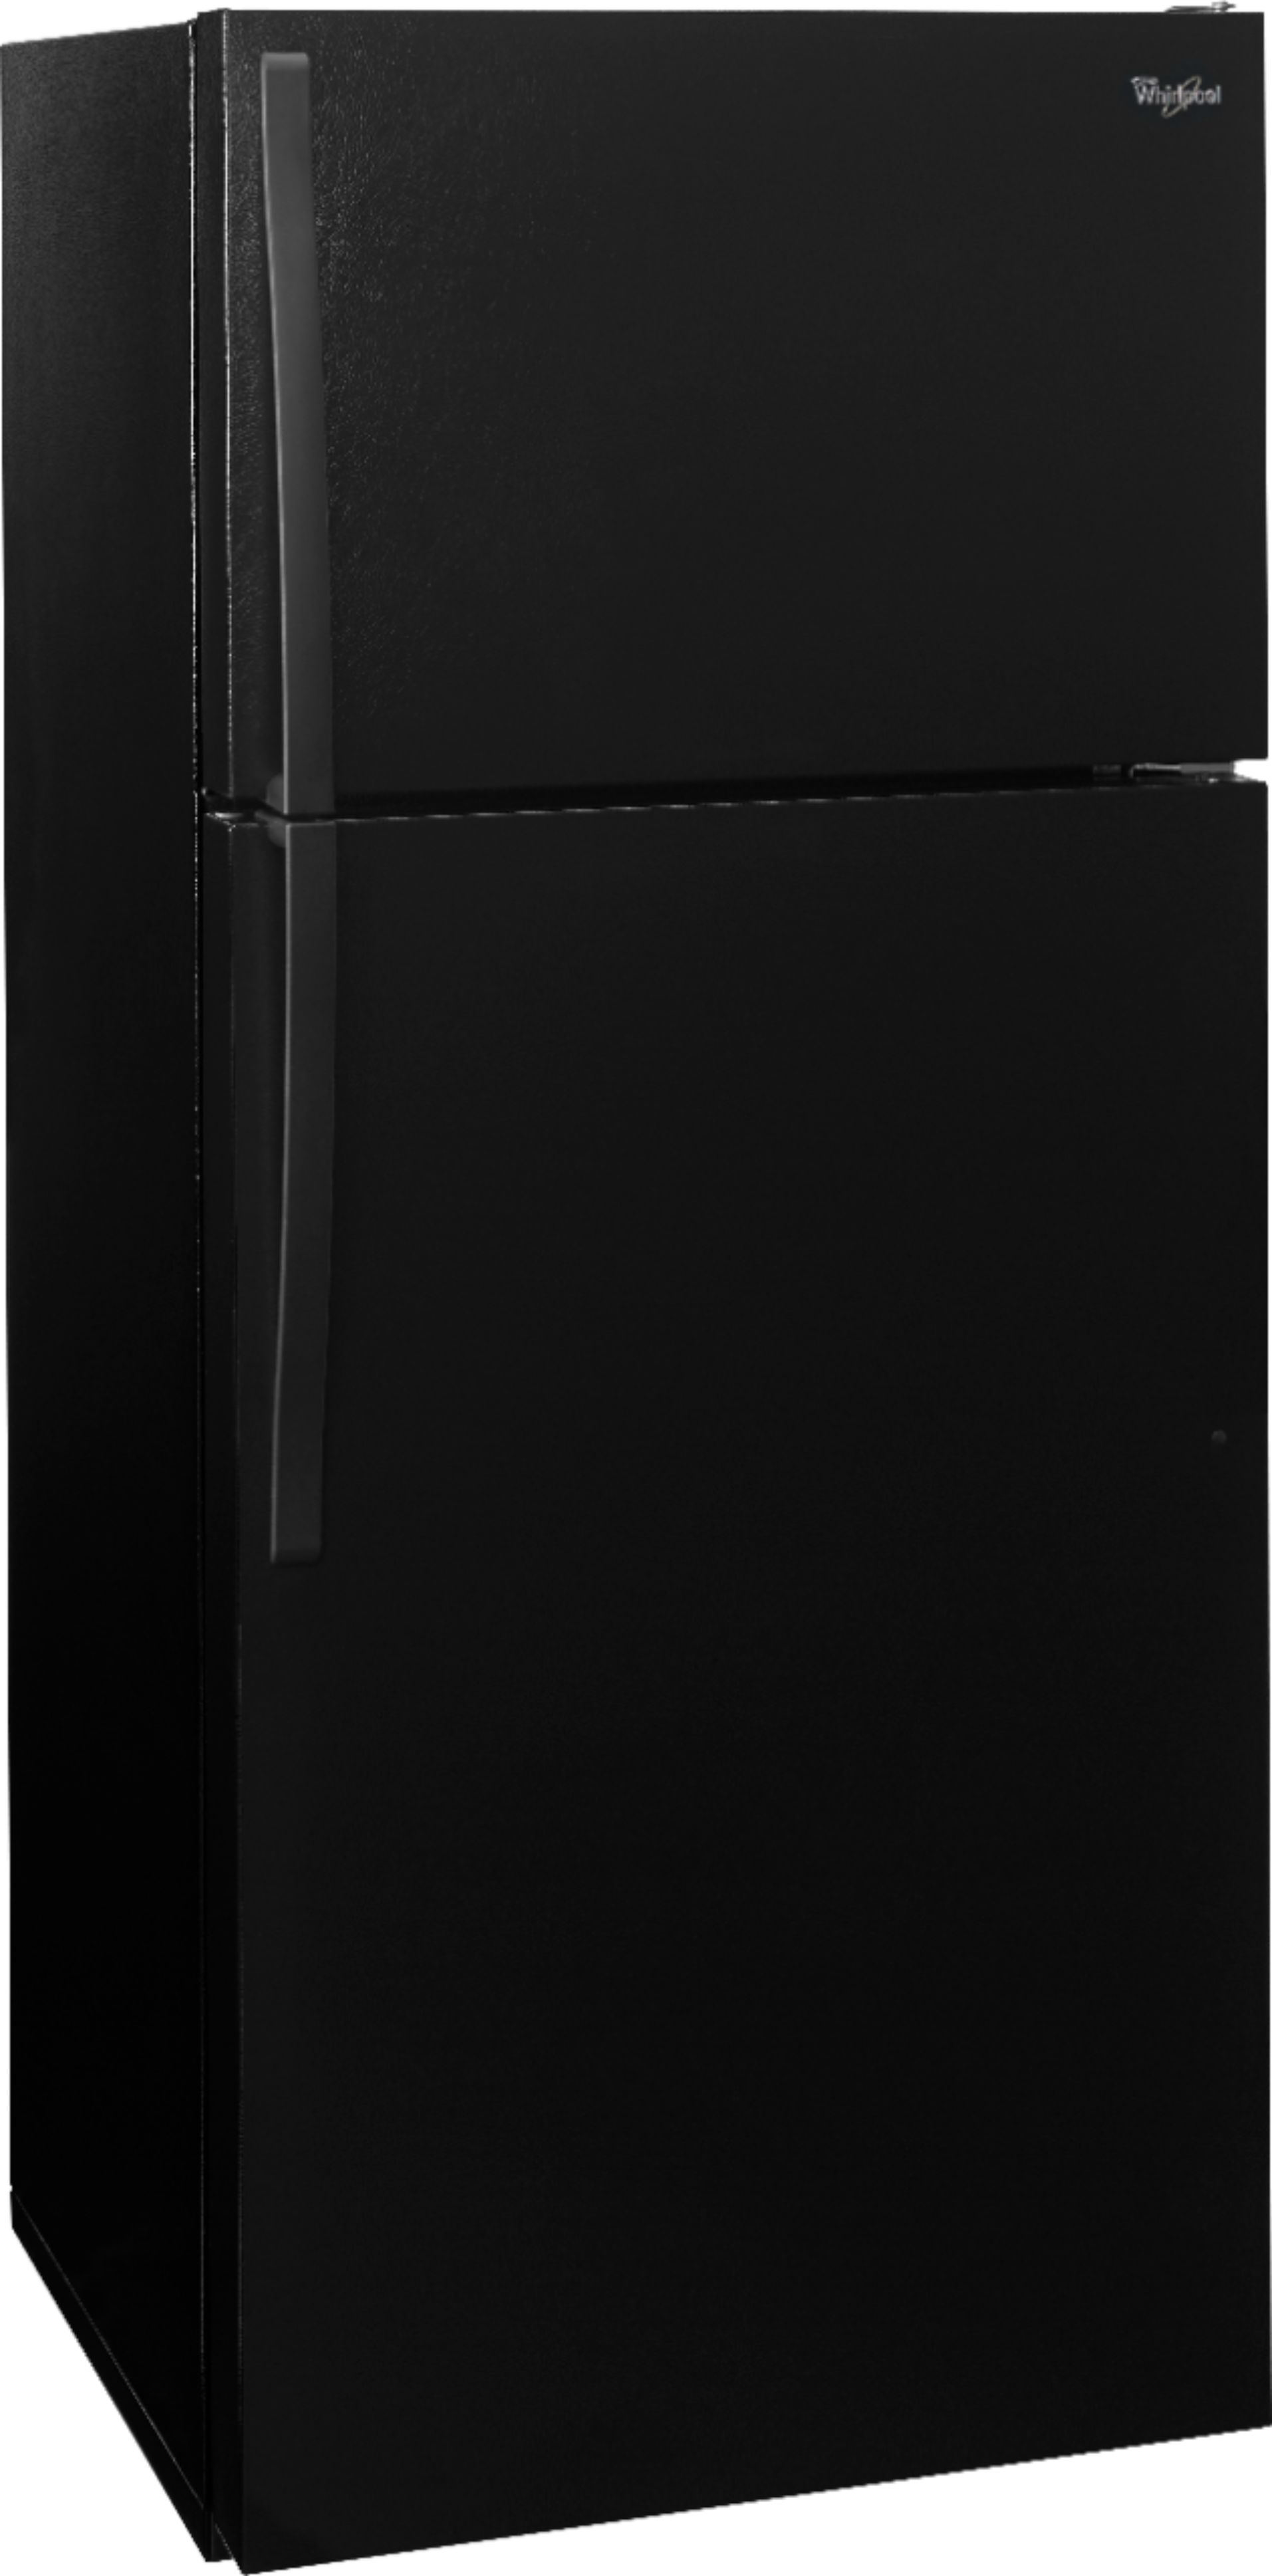 Angle View: GE - 17.5 Cu. Ft. Top-Freezer Refrigerator - Silver